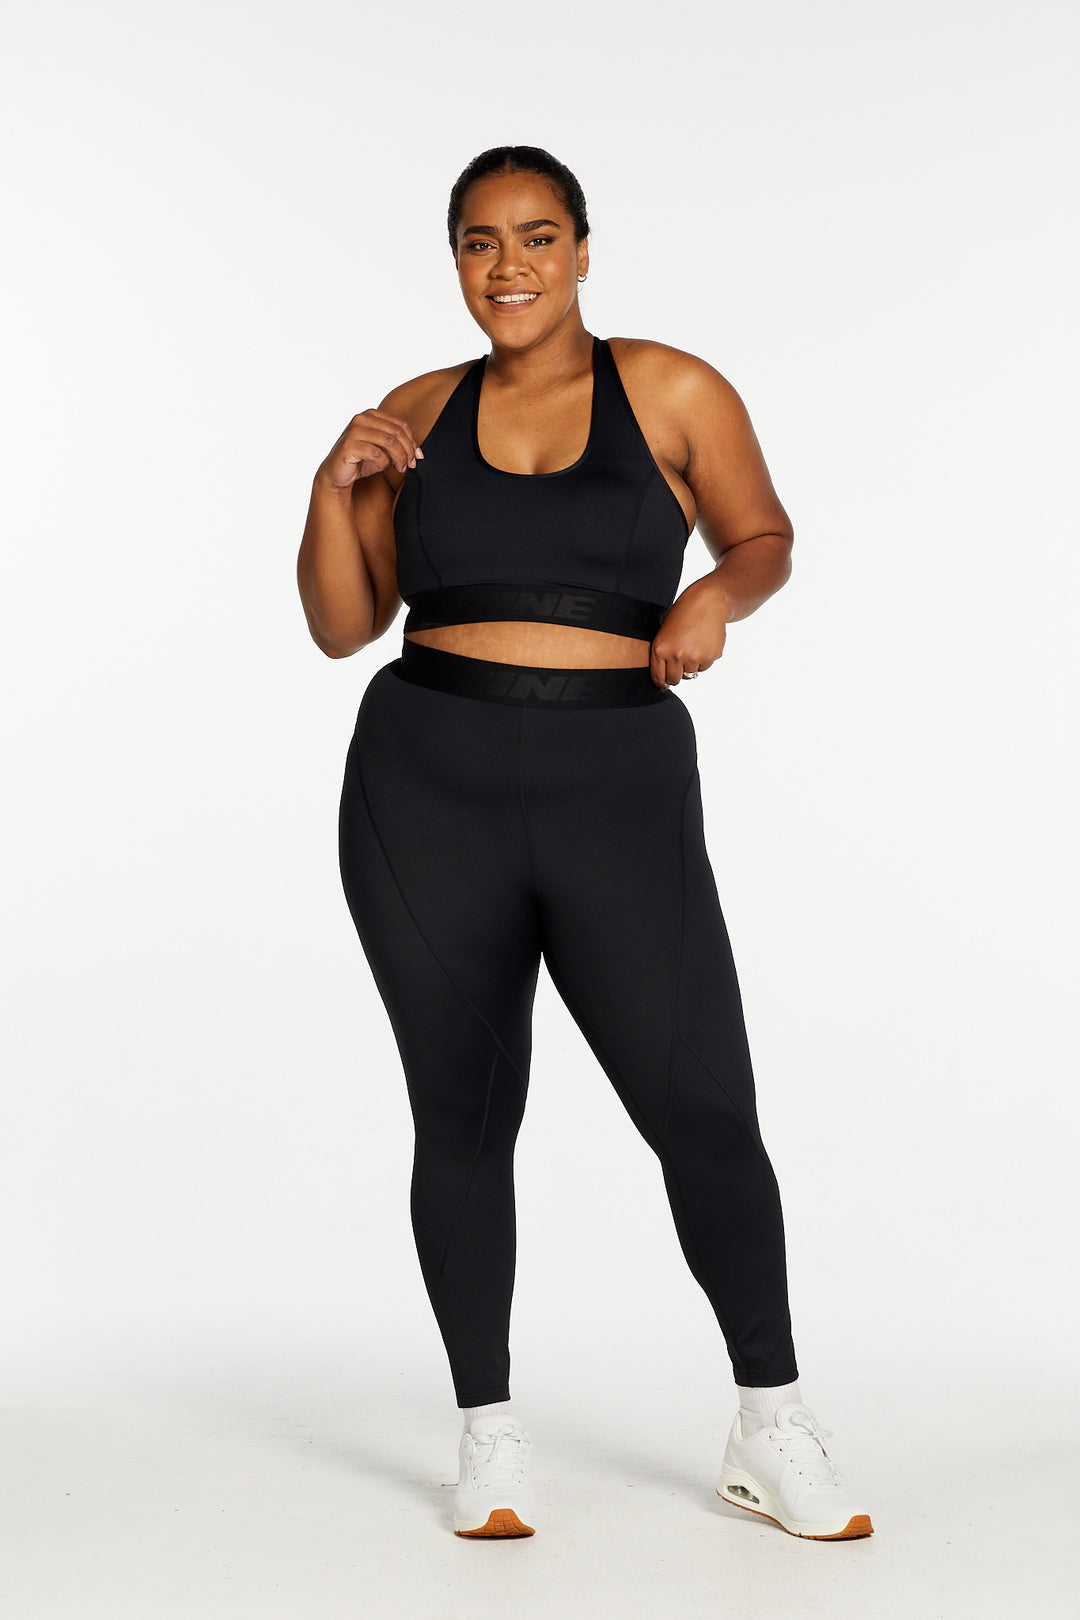 Hole Seamless Long Sleeve Top Leggings Set Available in Sizes S/M-L/XL –  Meika's Boutique N More LLC